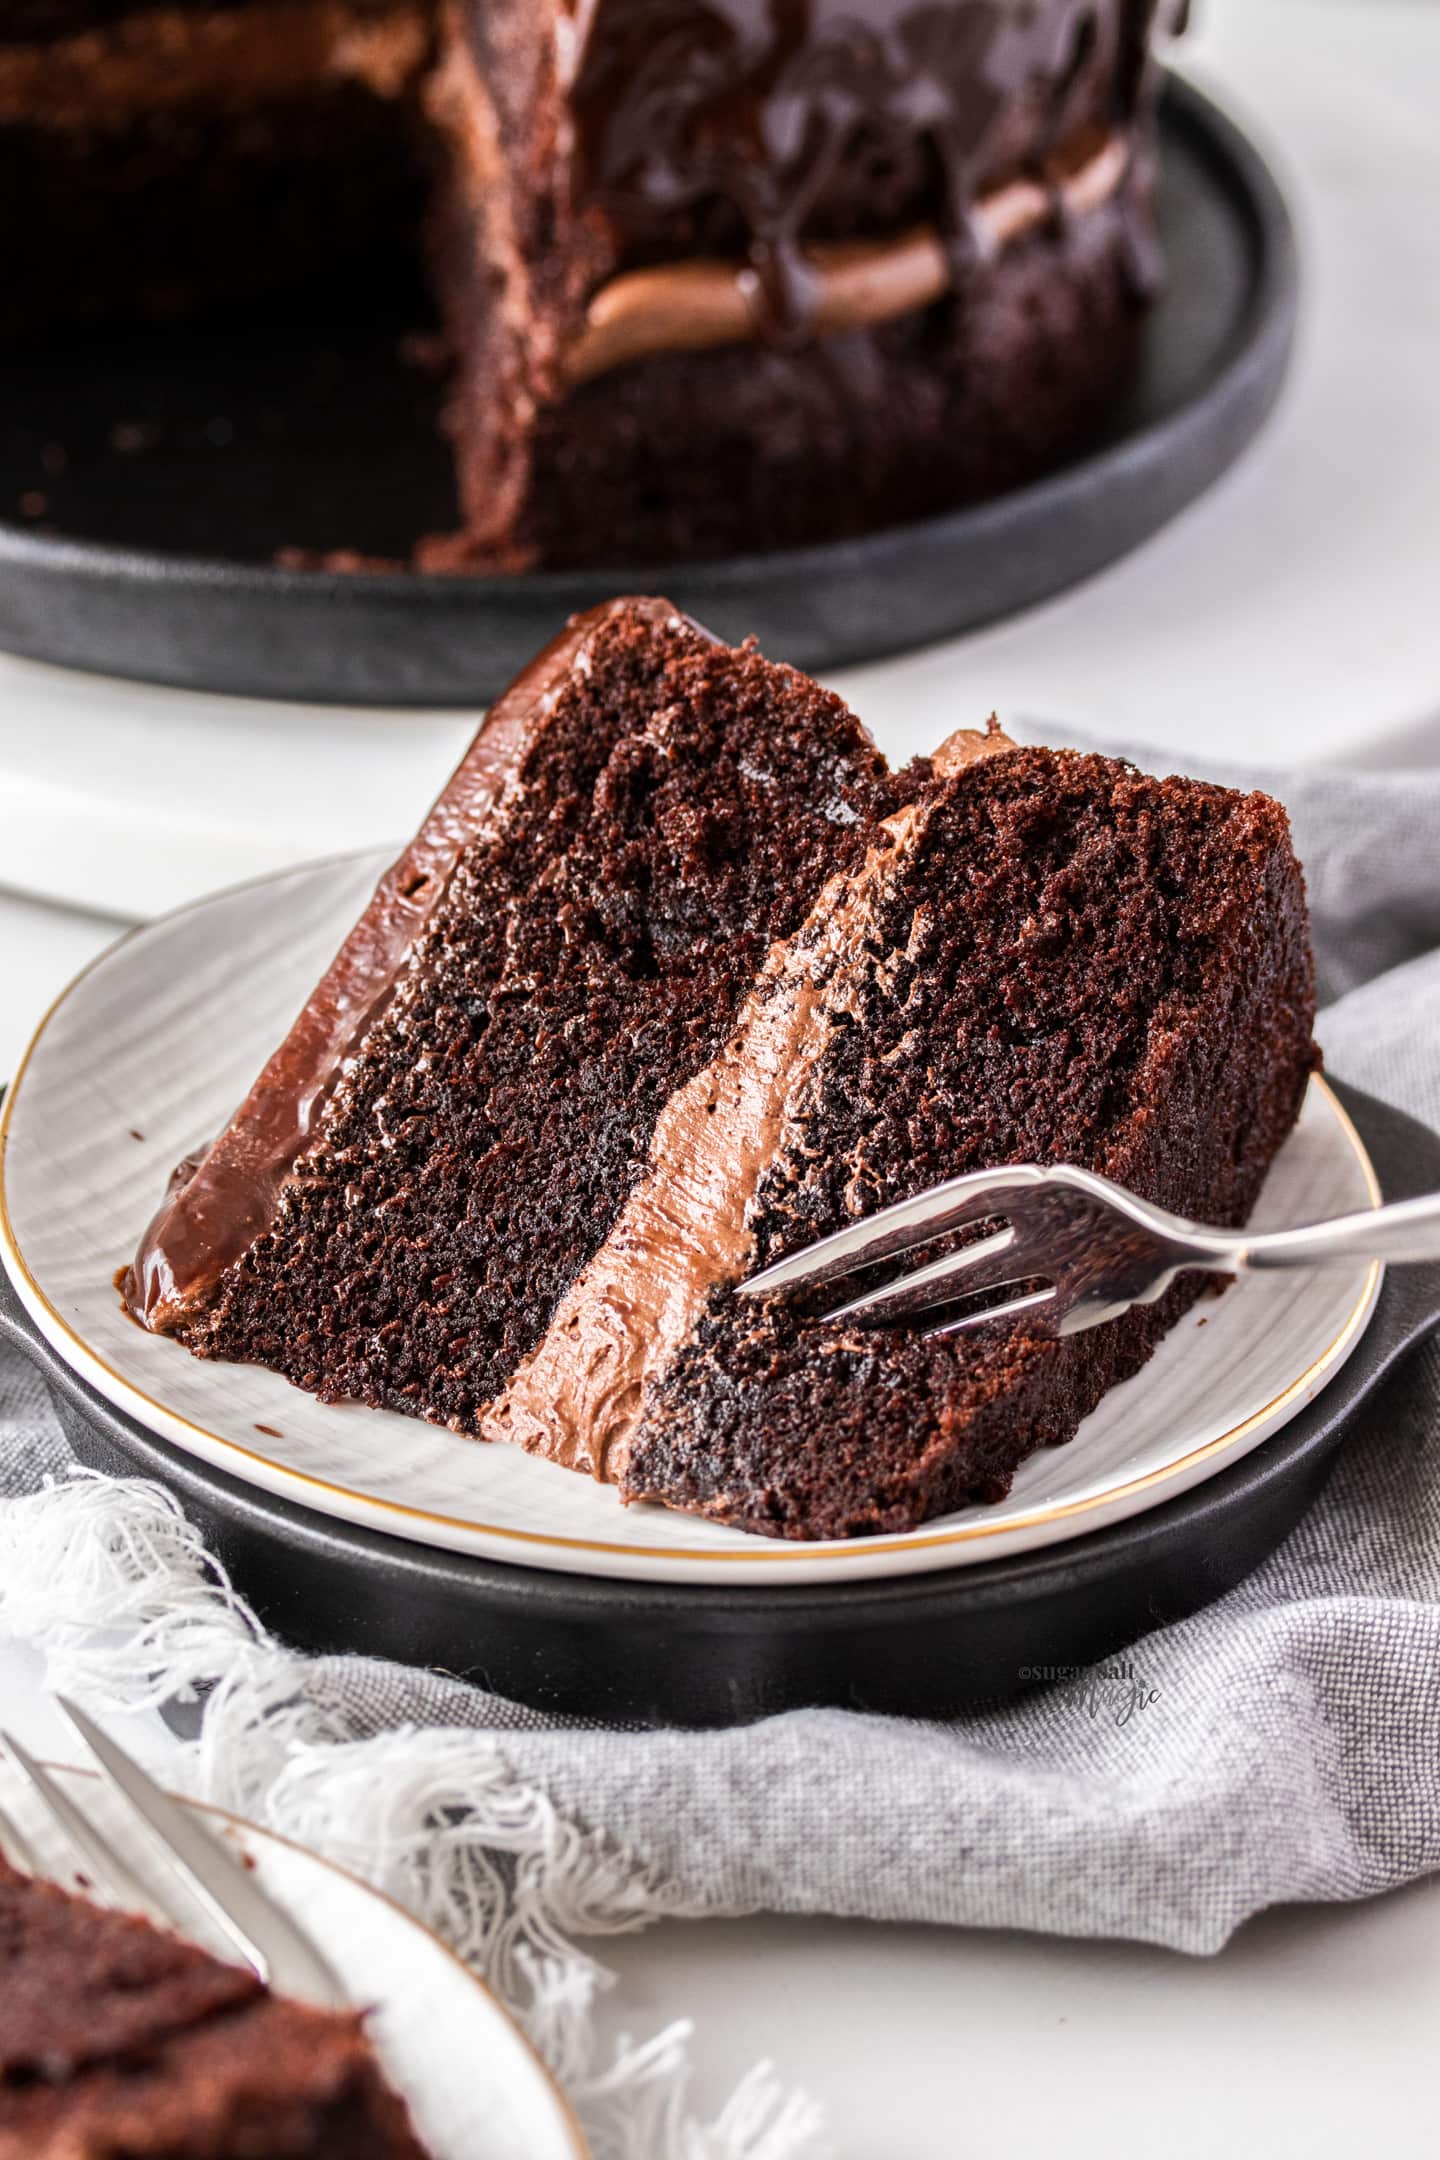 A fork digging into a slice of chocolate cake.